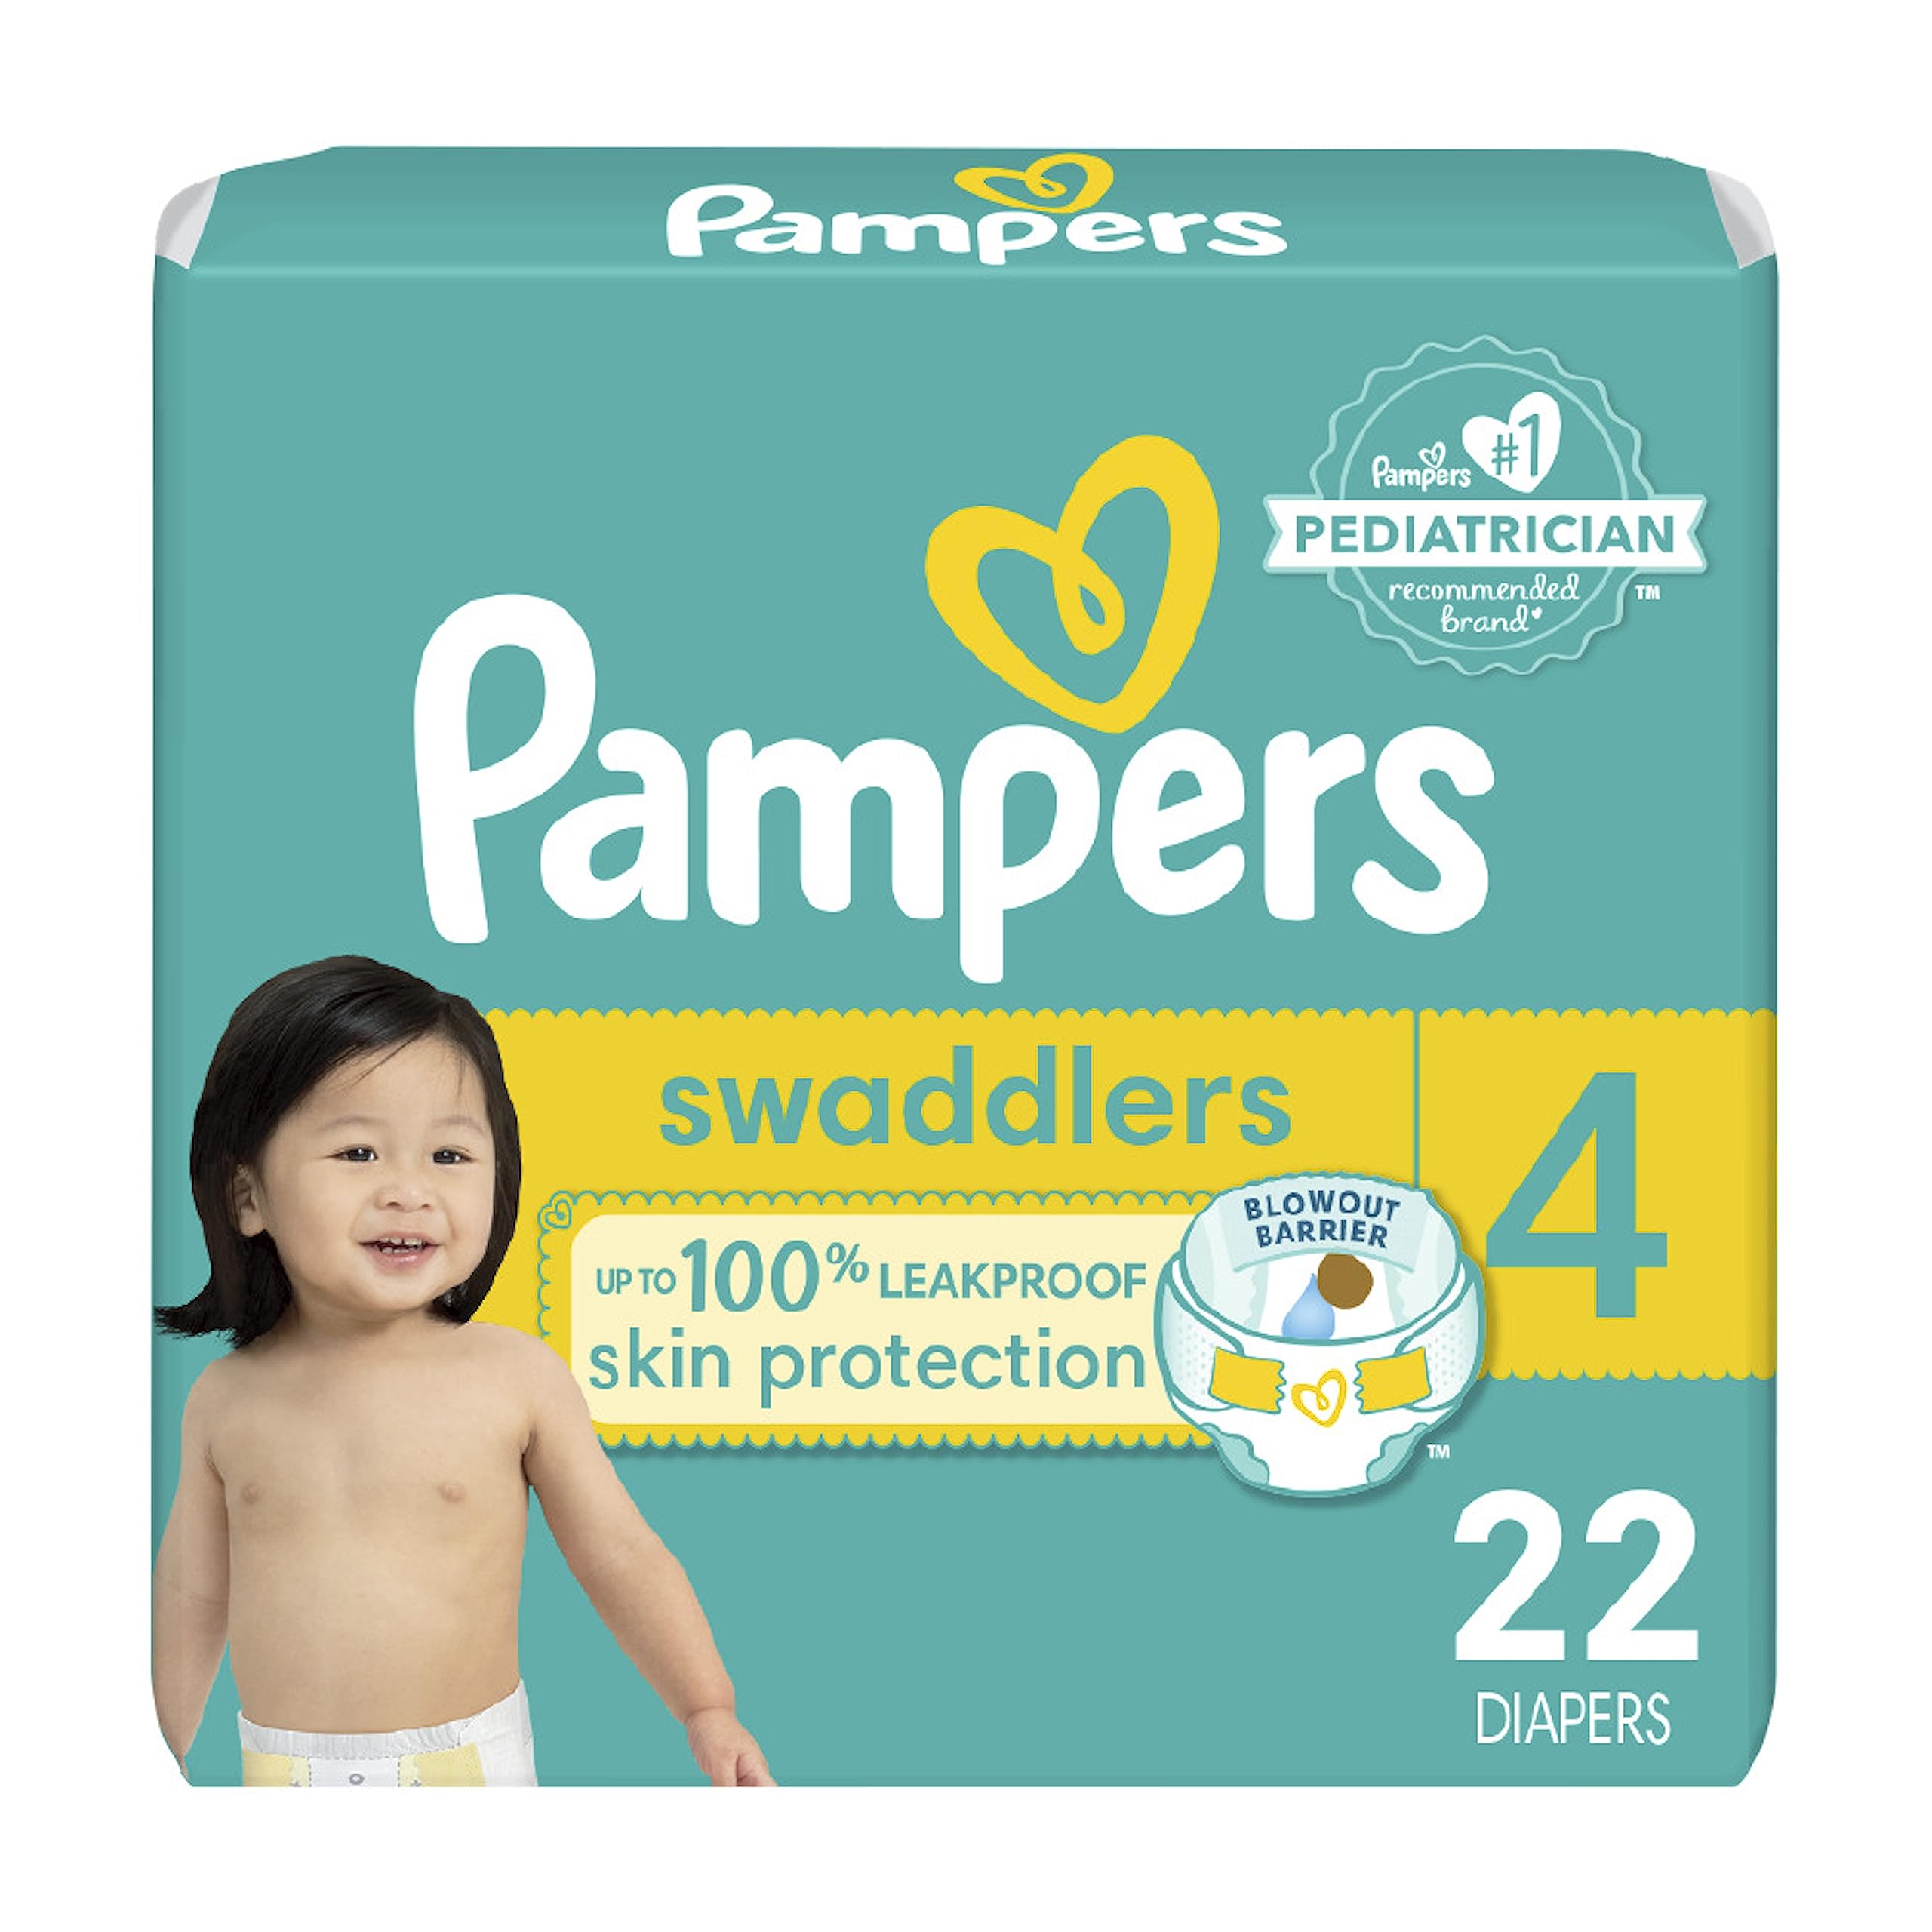 pampers tax free 2016